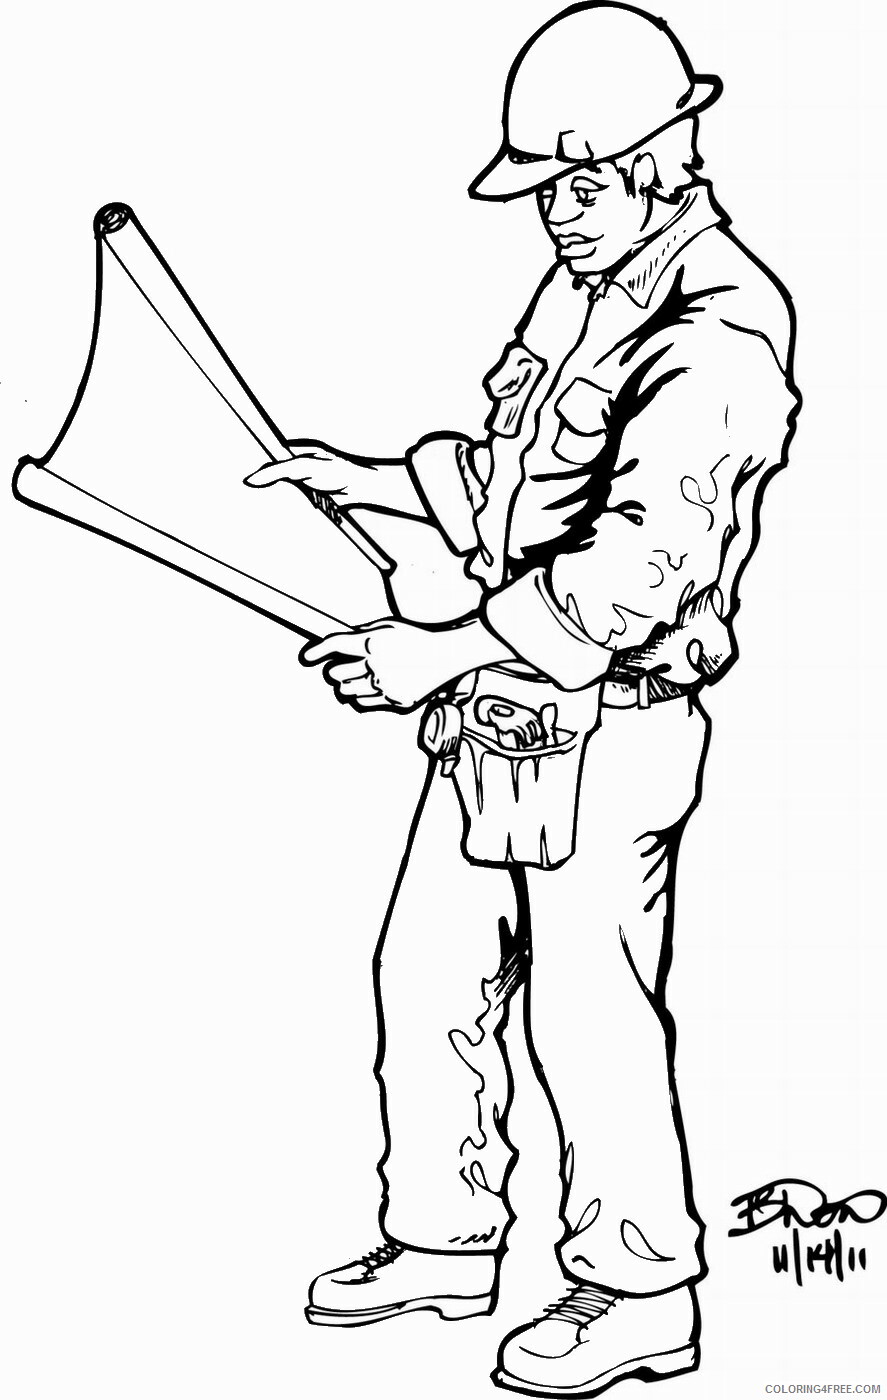 Construction Coloring Pages for boys Printable 2020 0120 Coloring4free